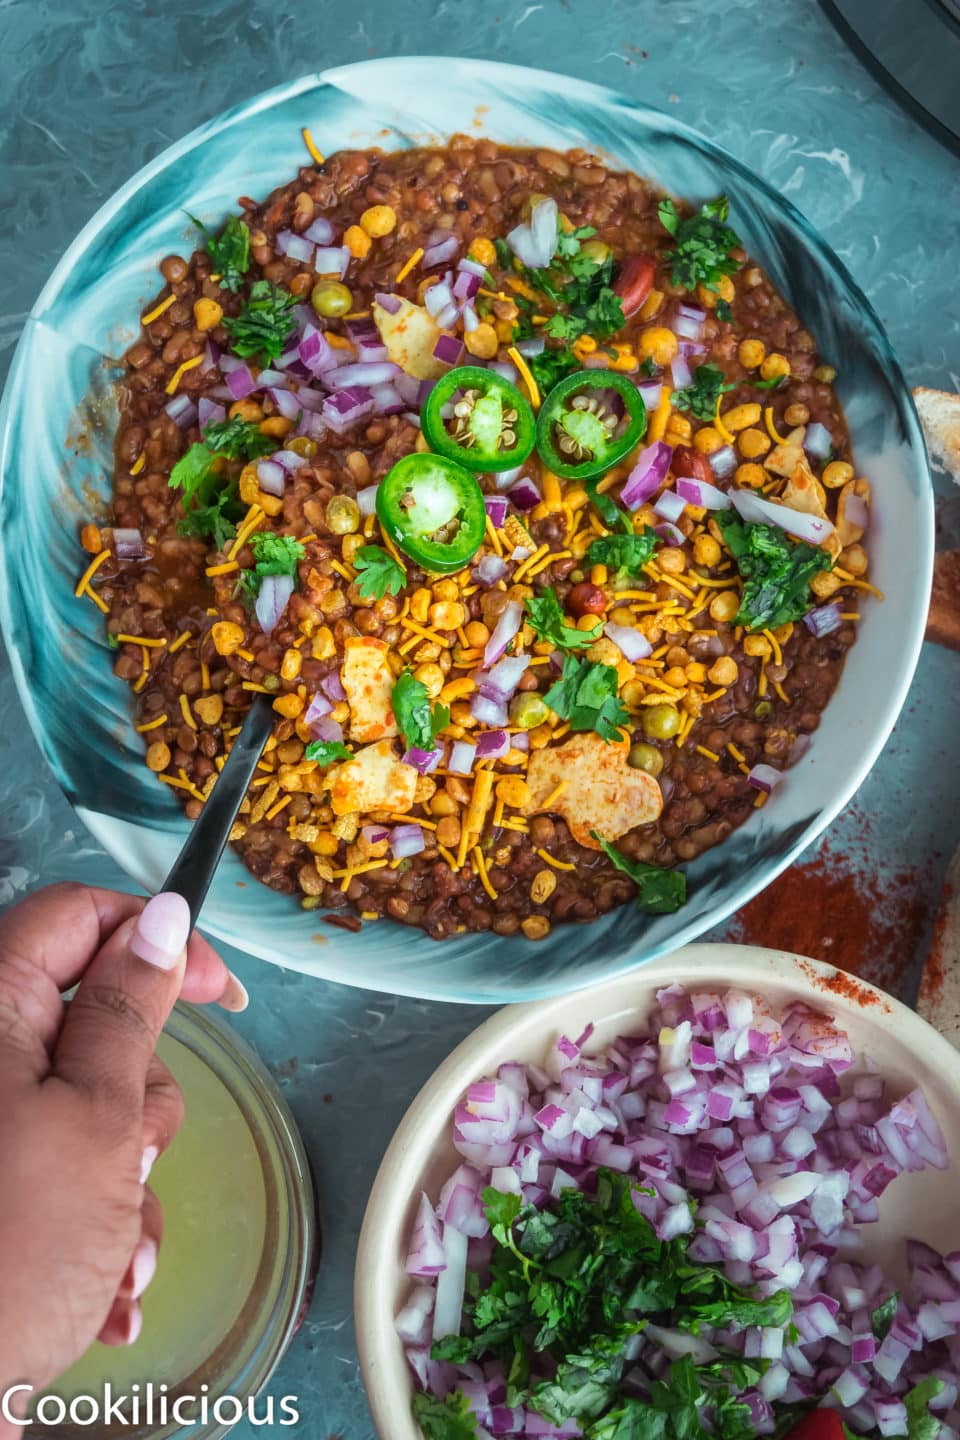 a handing holding a spoon and digging into a bowl of Vegan Matki Misal